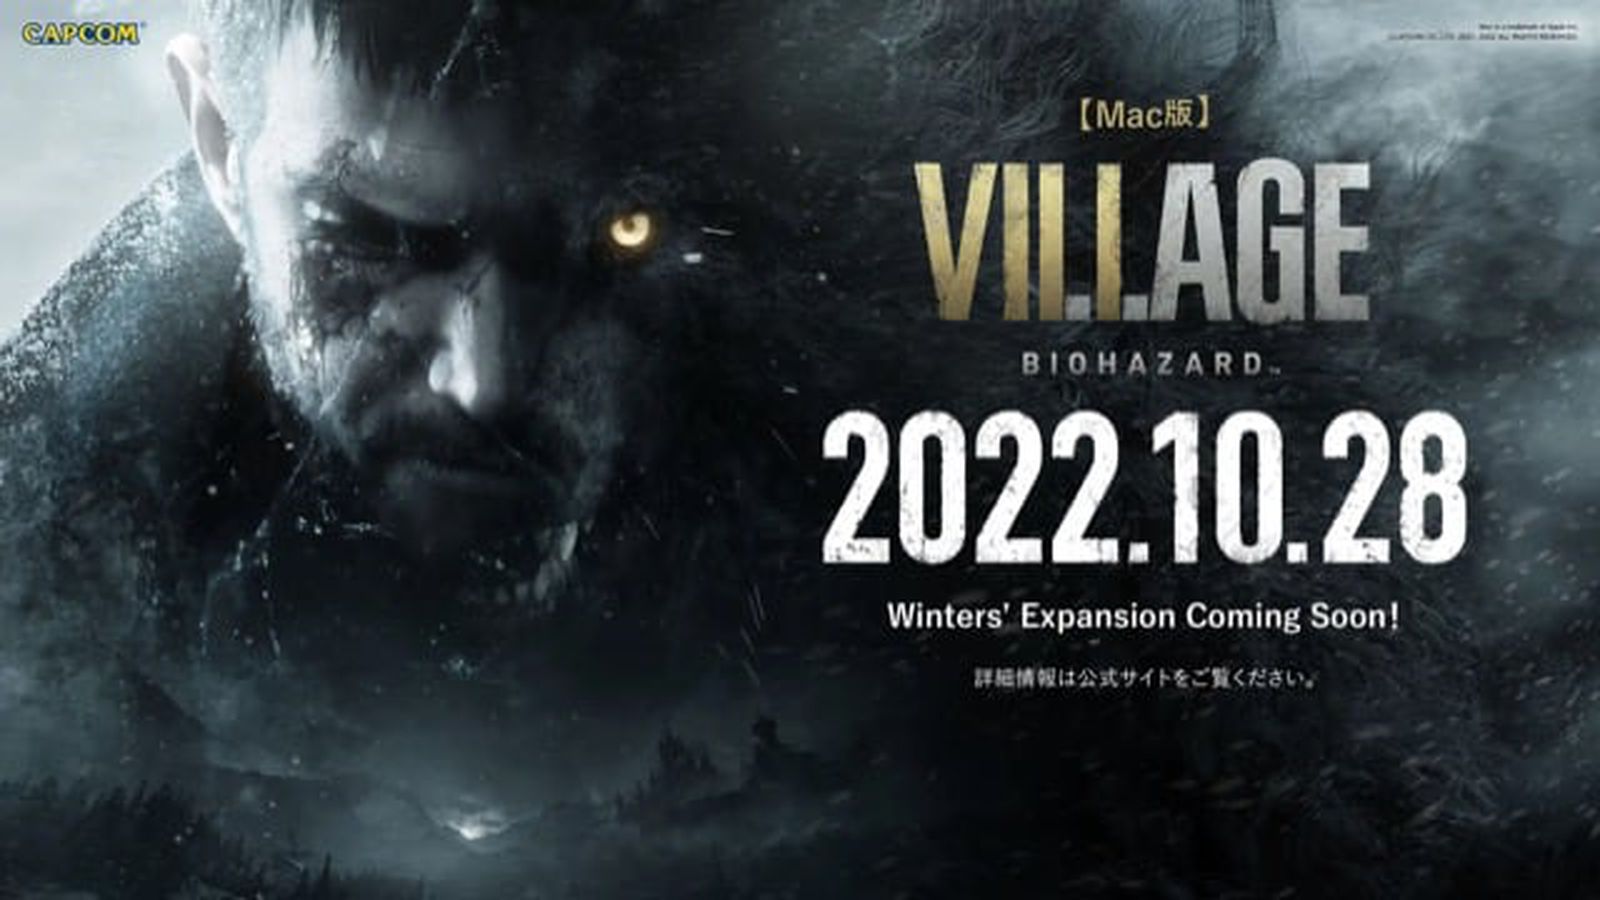 Capcom is bringing Resident Evil Village to Apple Silicon Mac next week